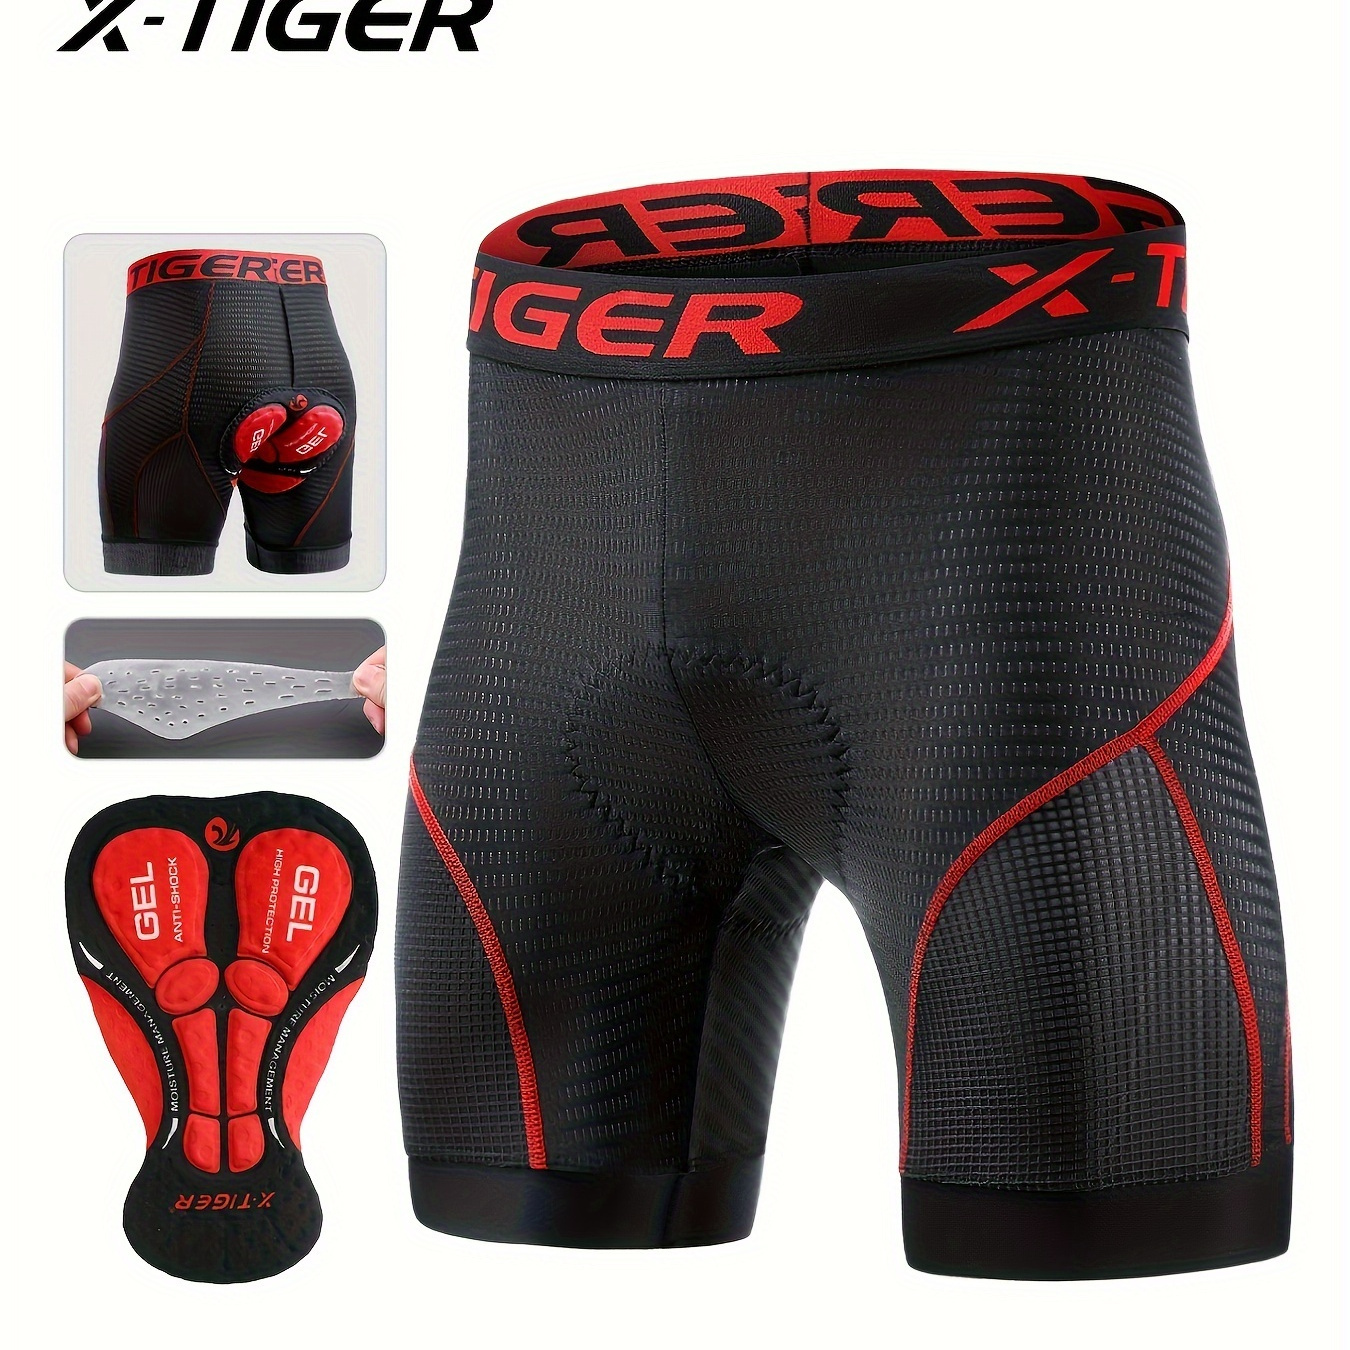 

X-tiger Men's Solid Mid Stretch Cycling Shorts With Pocket Design, 5d Padded Bicycle Riding Pants For Biking